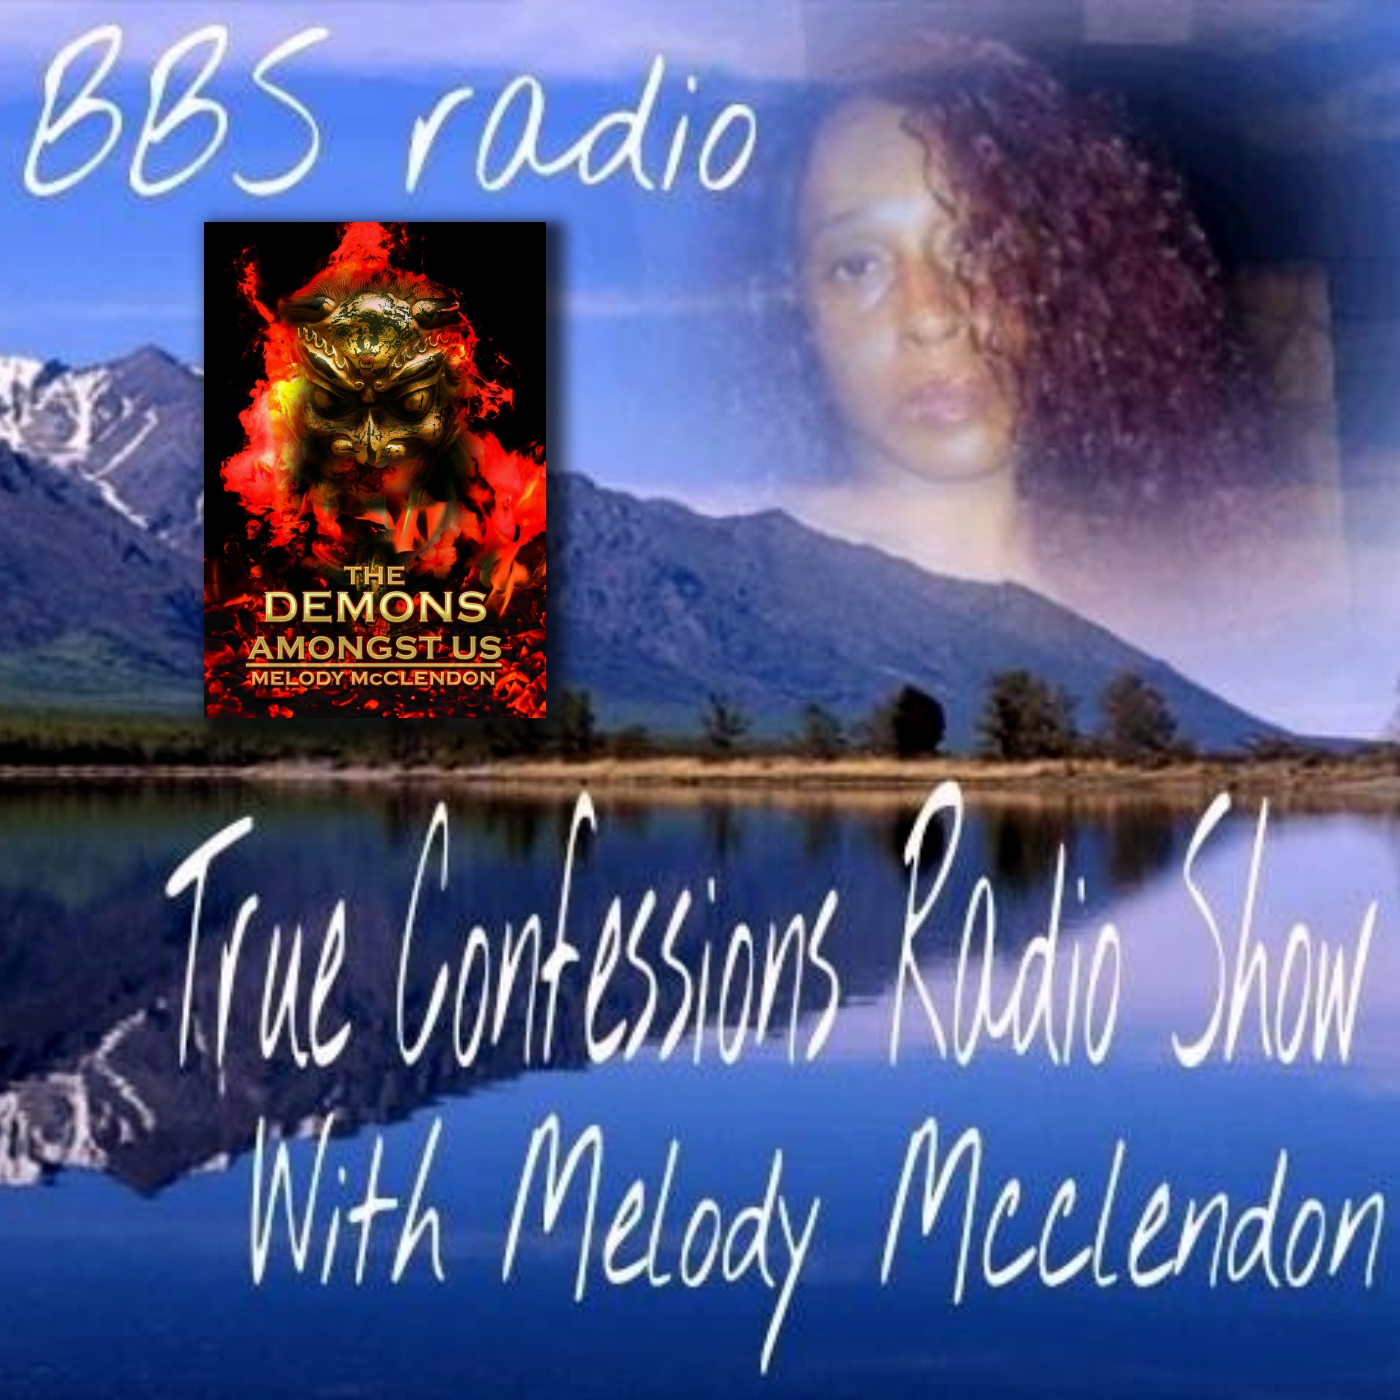 True Confessions Radio Show with Melody McClendon